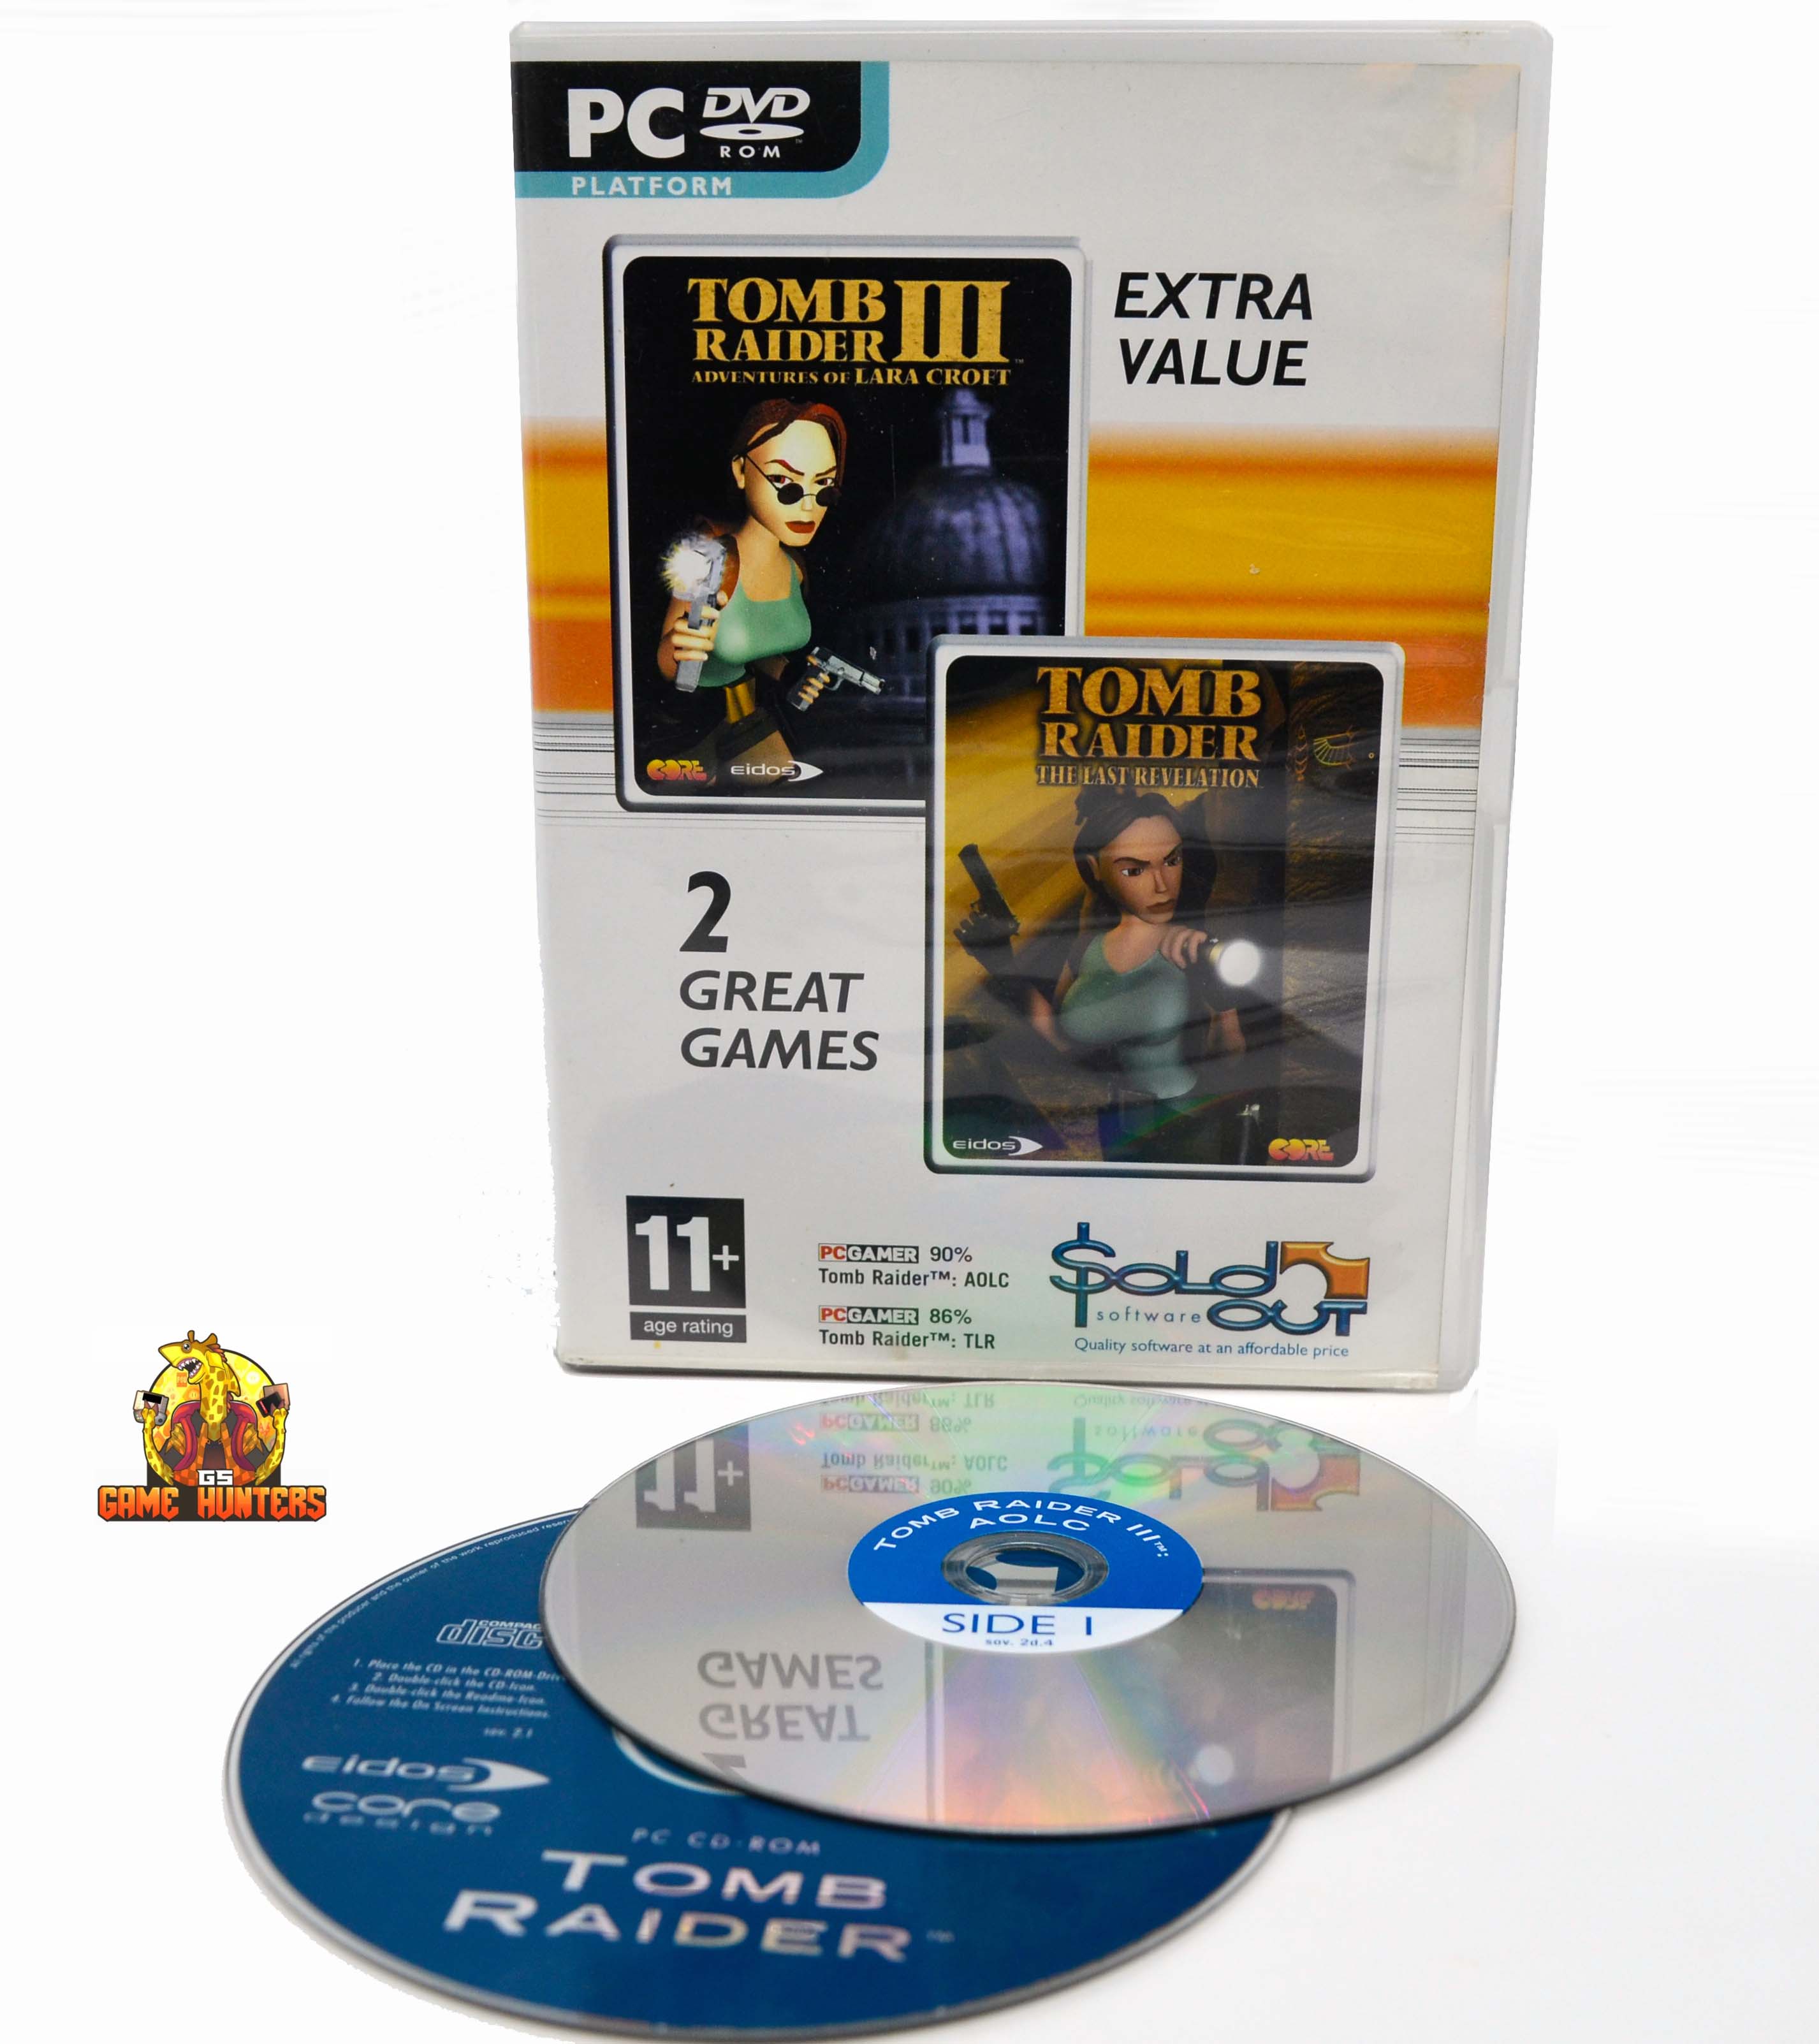 Tomb Raider Adventures of Lara Croft & The Last Revelations  Case & Discs (one is double sided).jpg  by GSGAMEHUNTERS